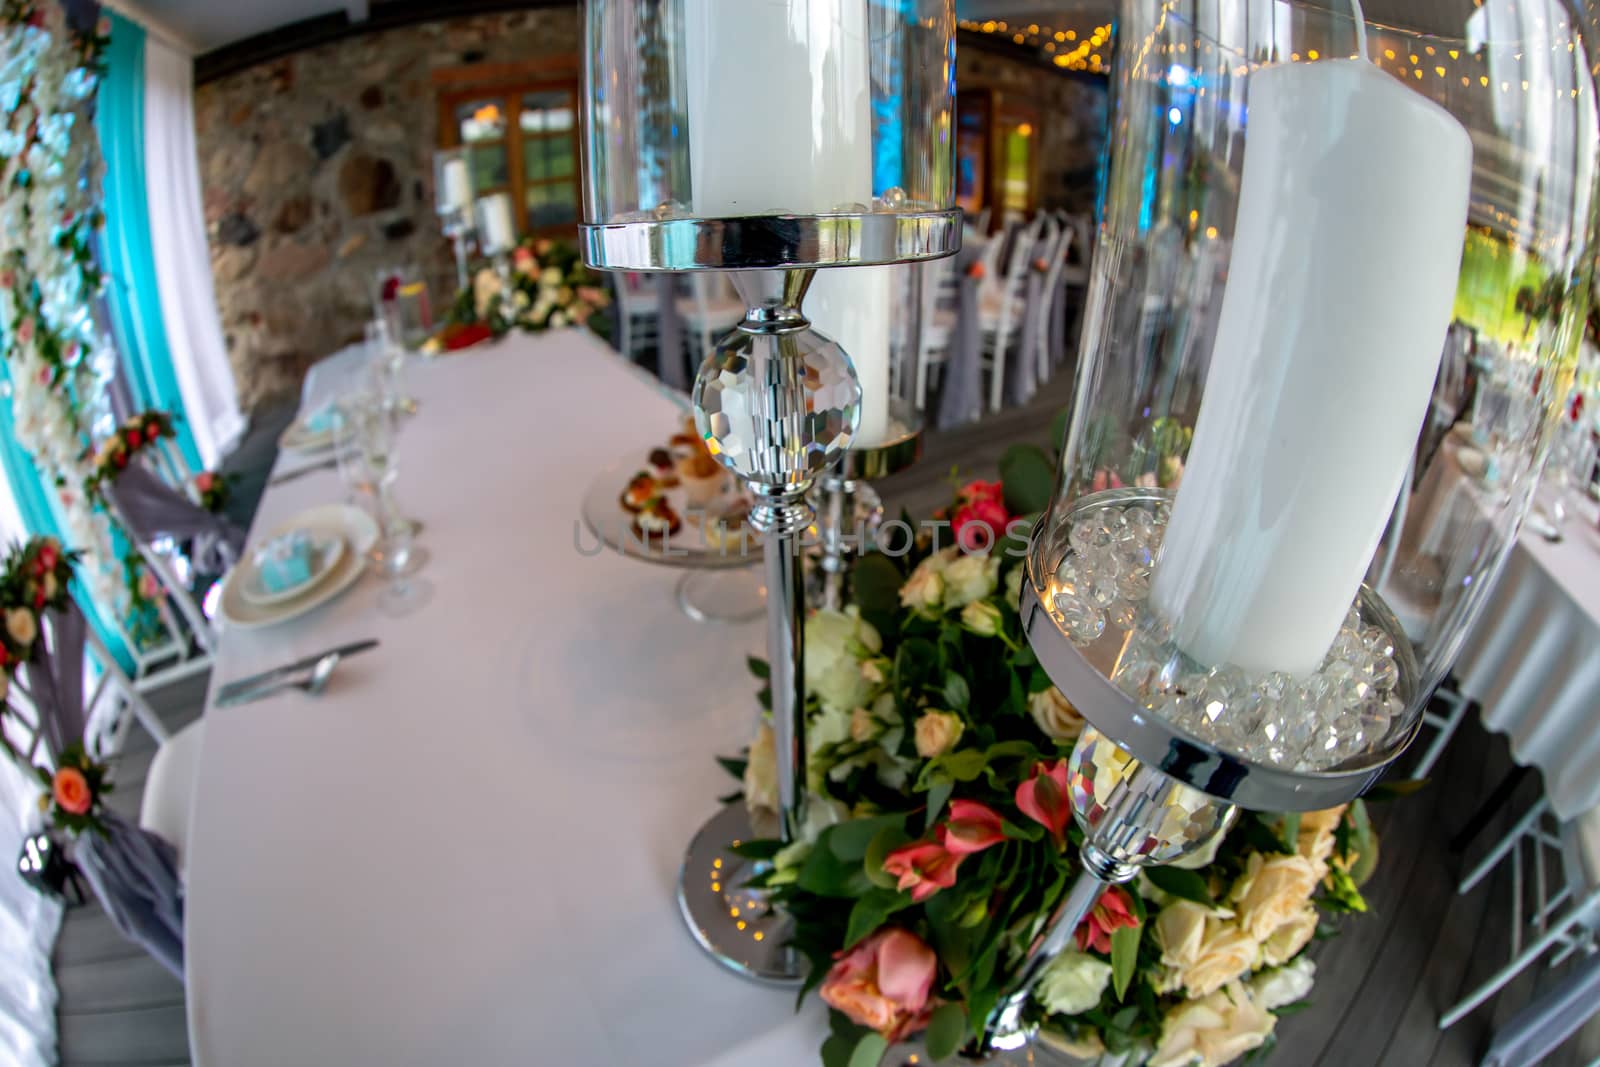 Table decoration for wedding reception. Candlestick with candles and bouquet of flowers on wedding table setting with white tablecloth. Shot with fisheye lens. 